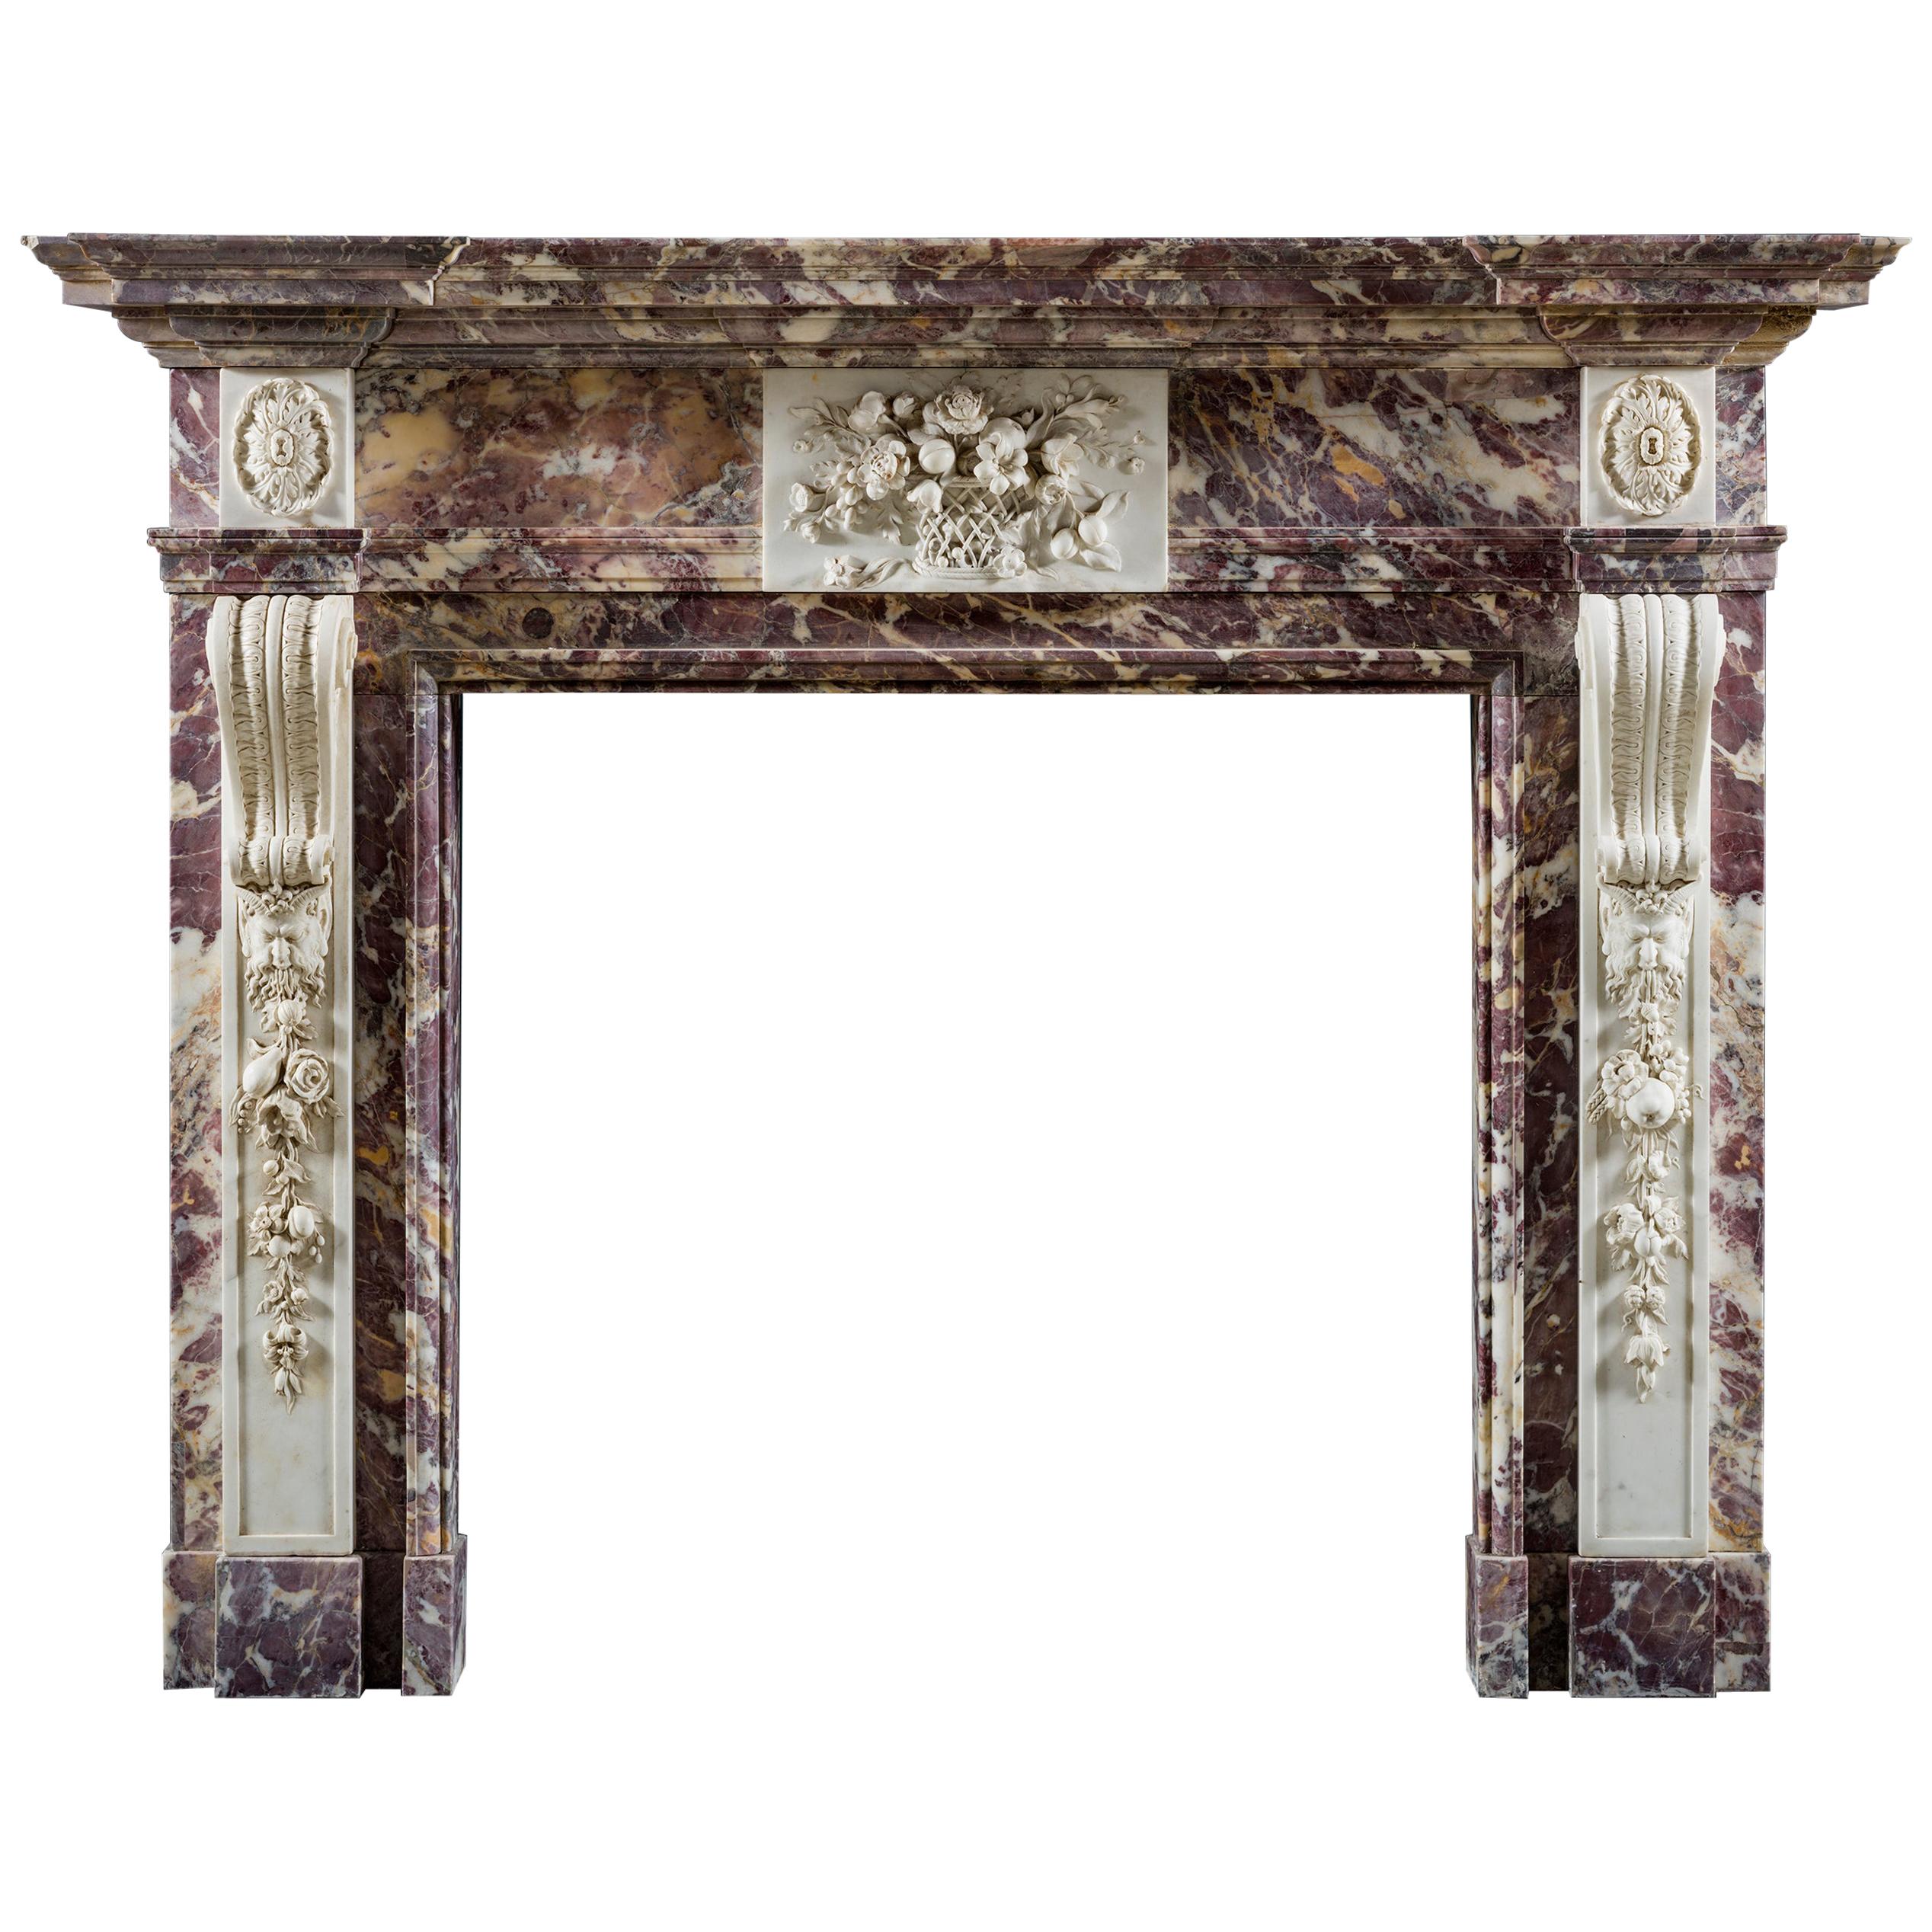 George II Palladian Fireplace in Breccia Violette and Statuary Marble